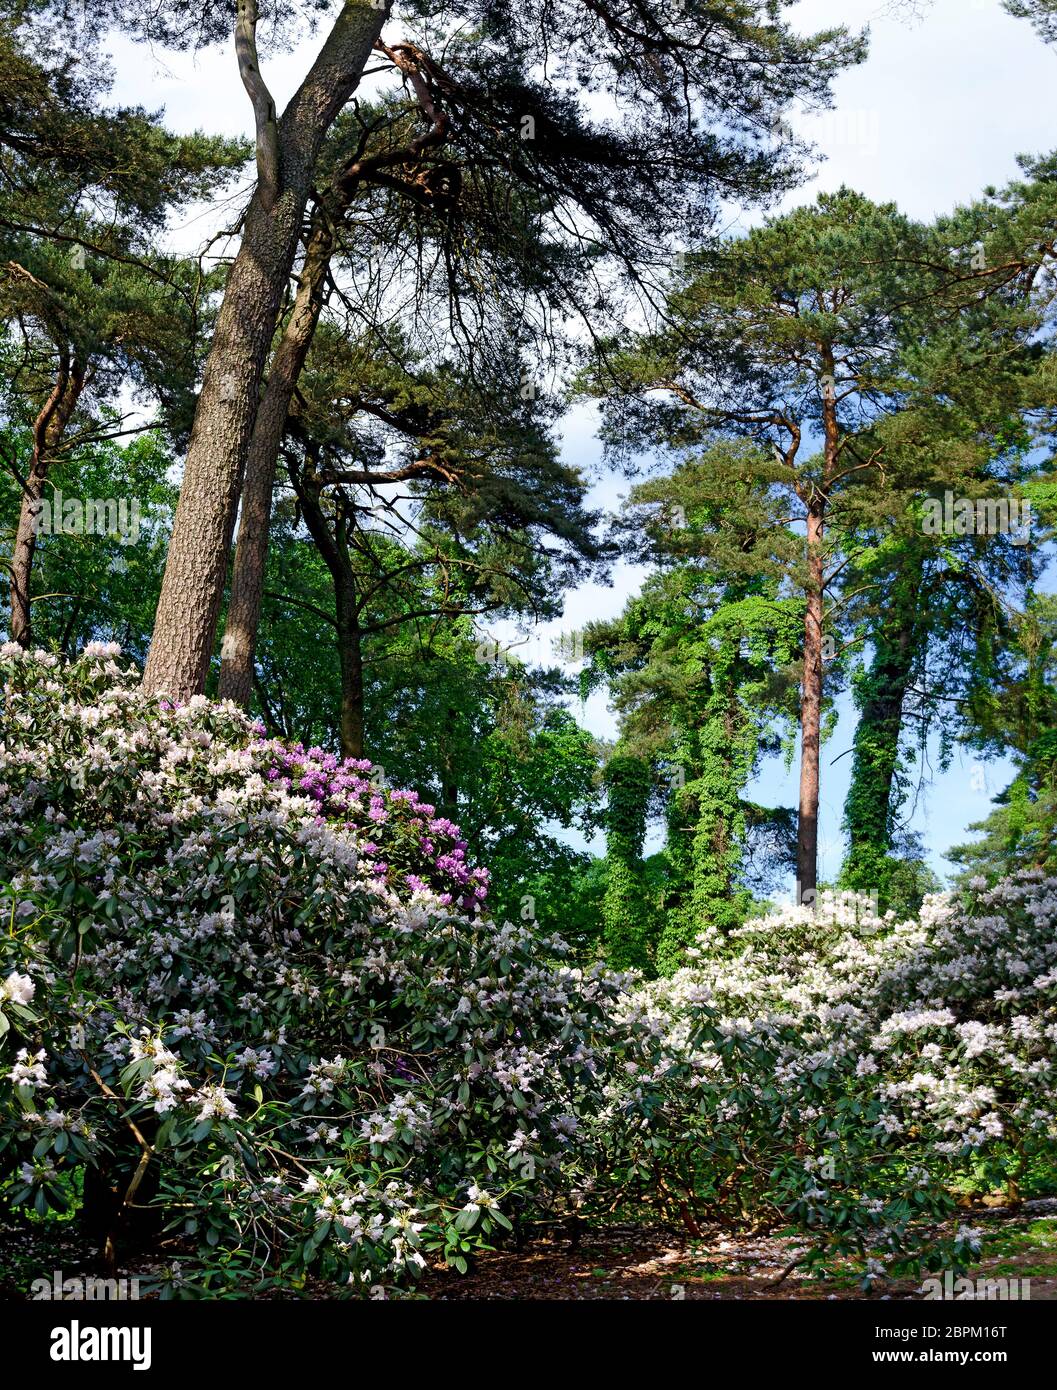 forest with pines and bushes of rhododendrons at Rostock, Germany Stock Photo